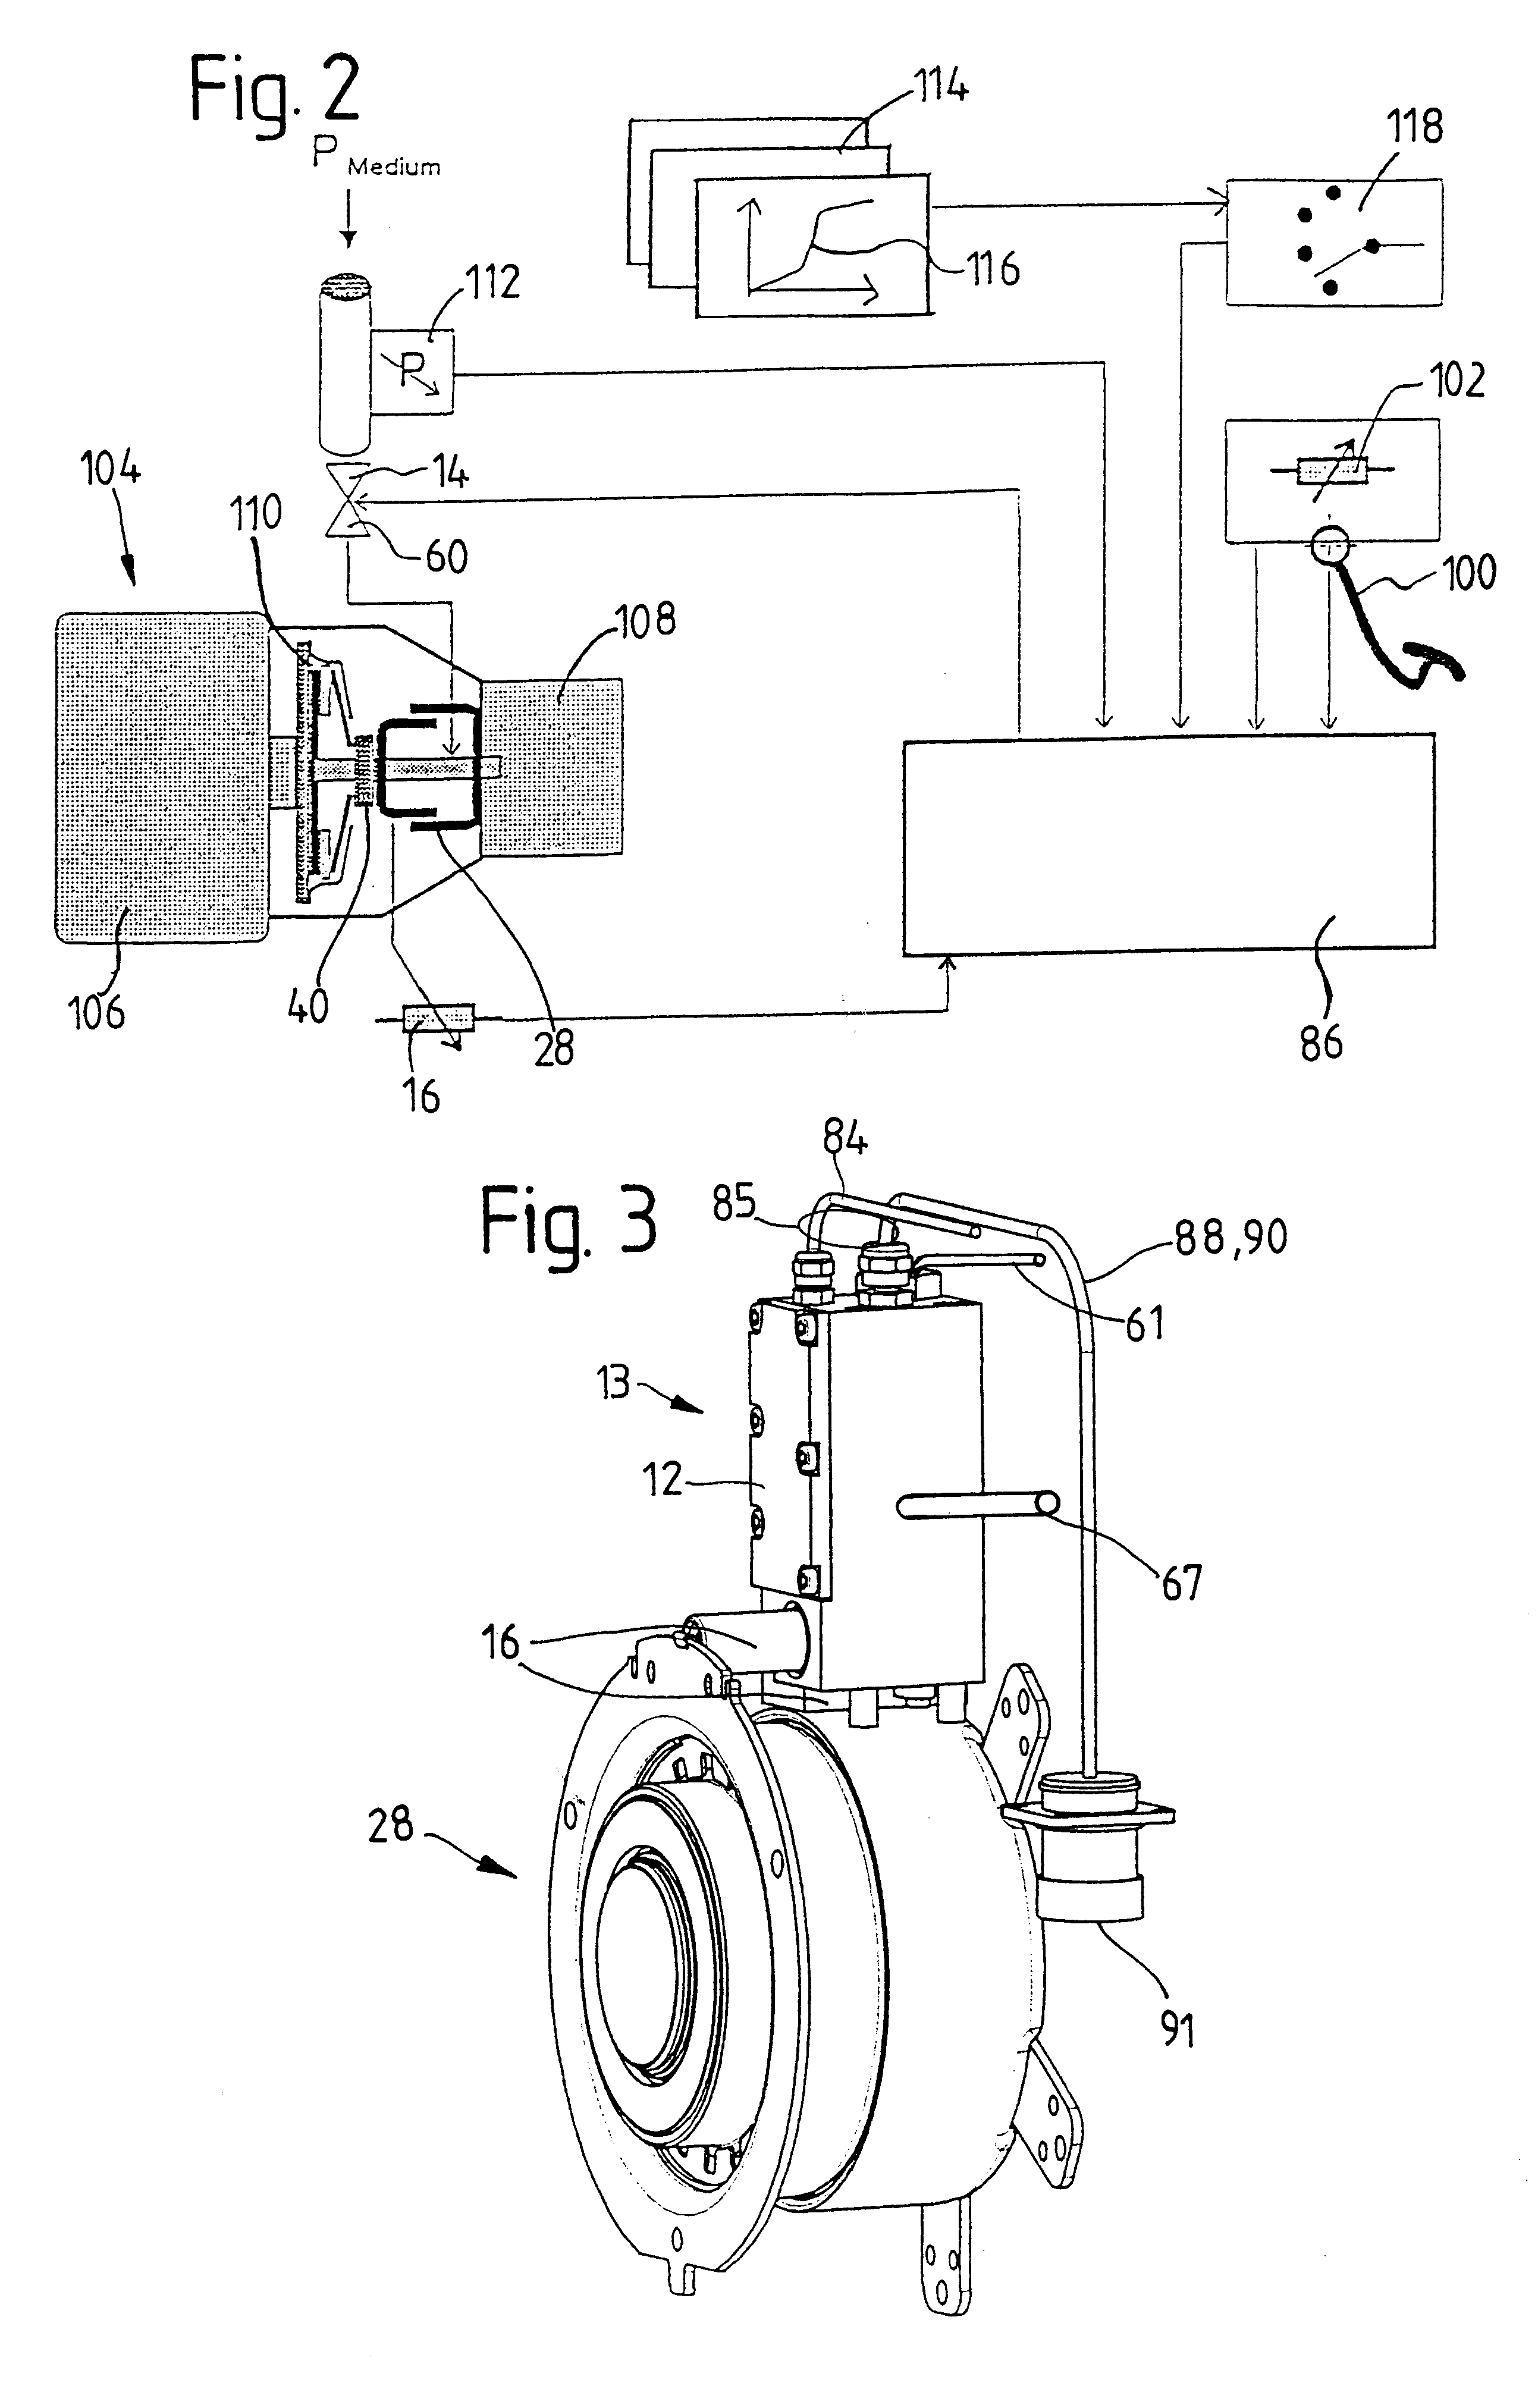 Actuation device for a friction clutch